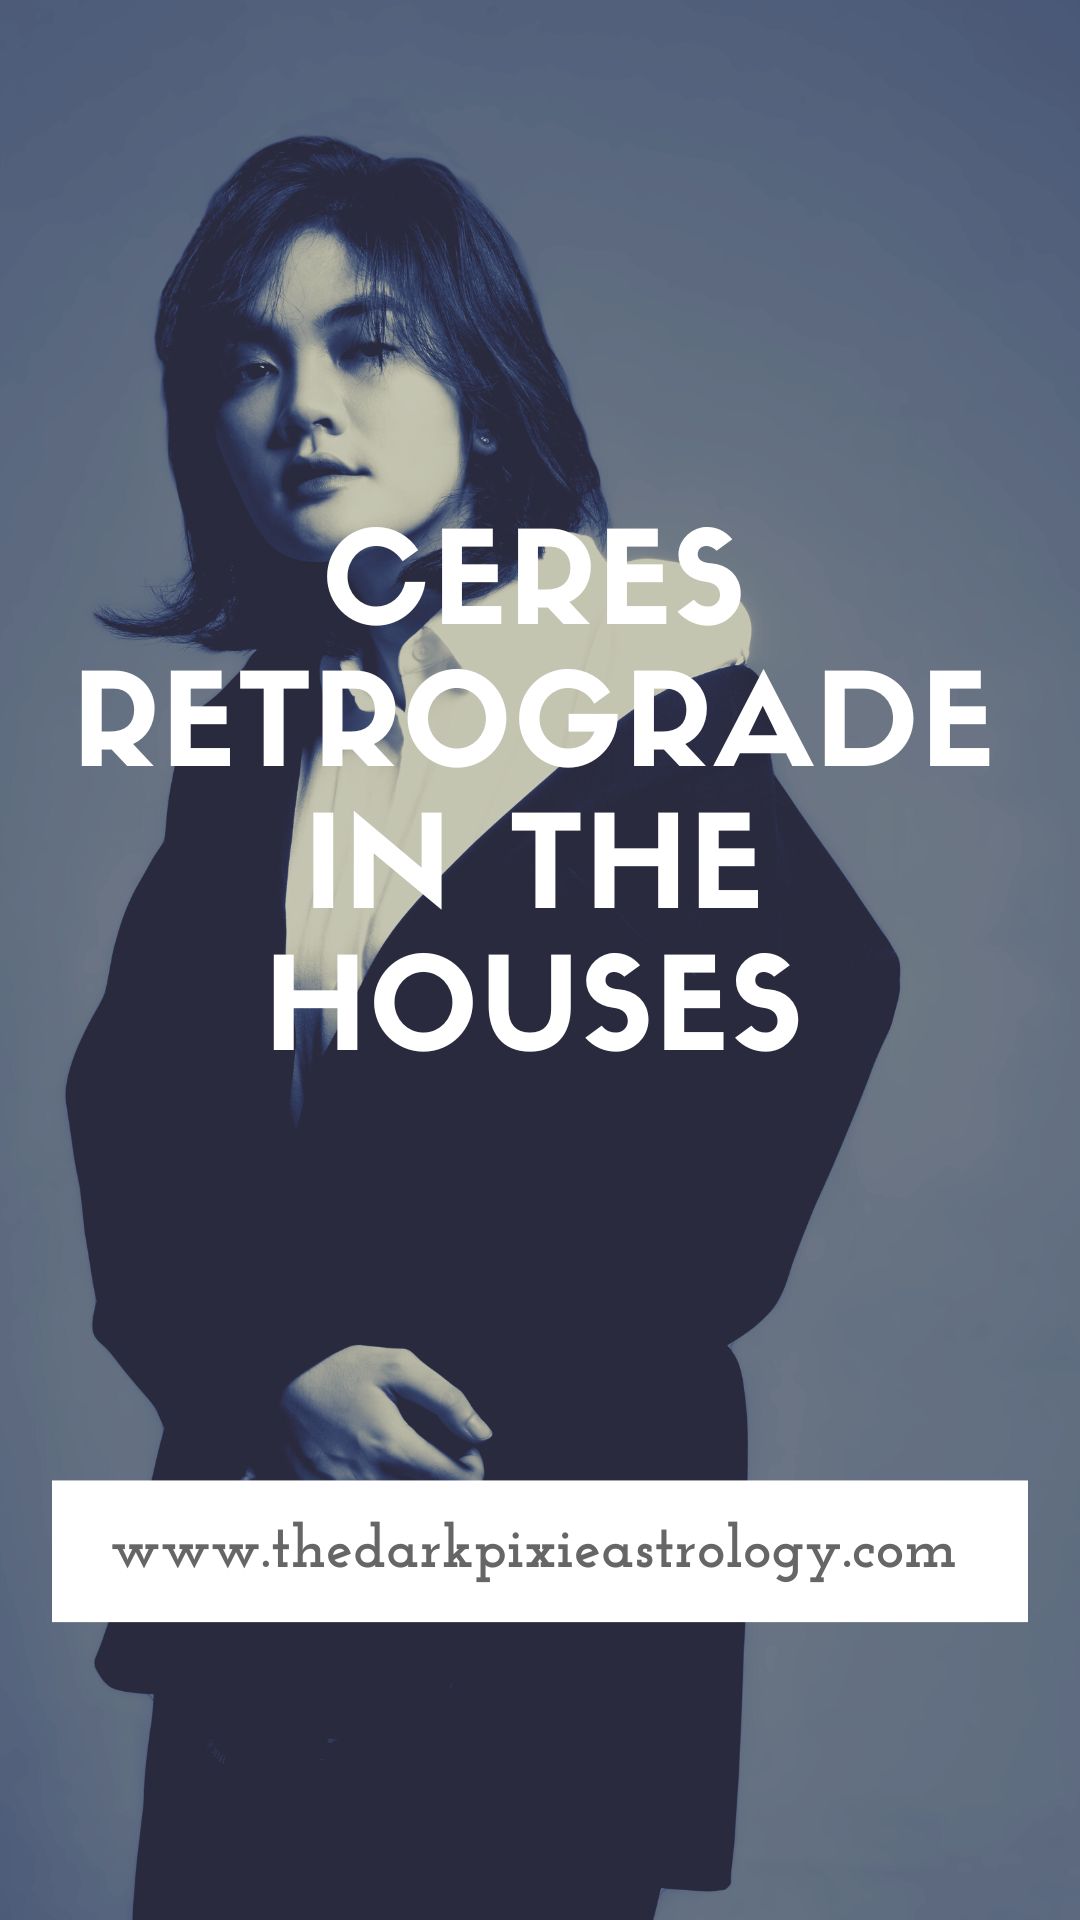 Ceres Retrograde in the Houses - The Dark Pixie Astrology